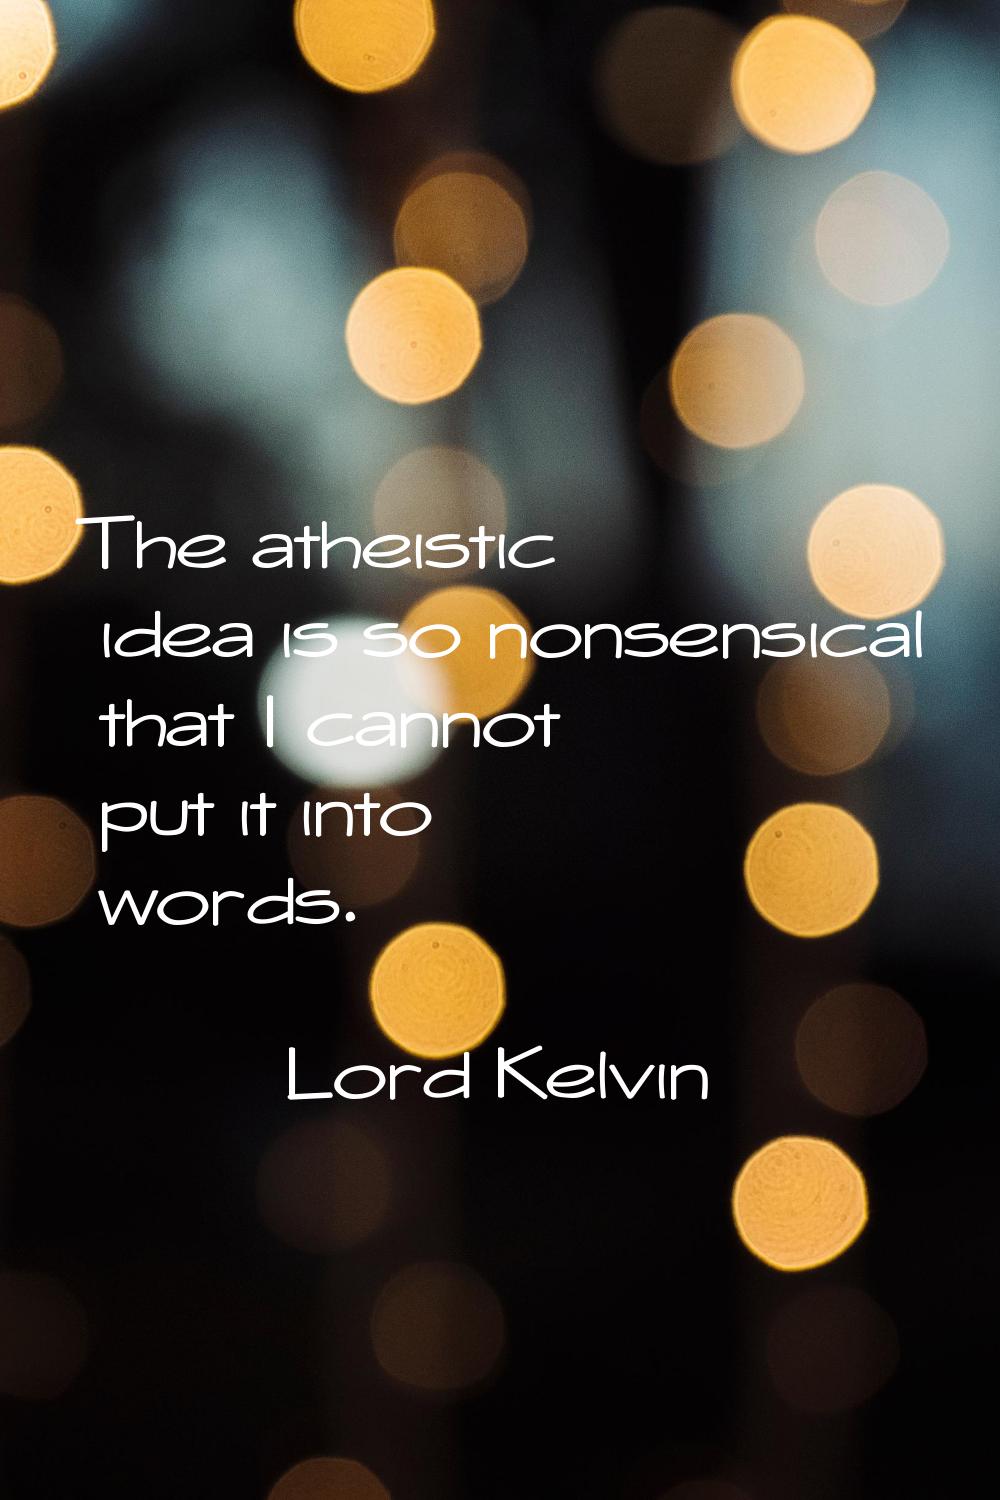 The atheistic idea is so nonsensical that I cannot put it into words.